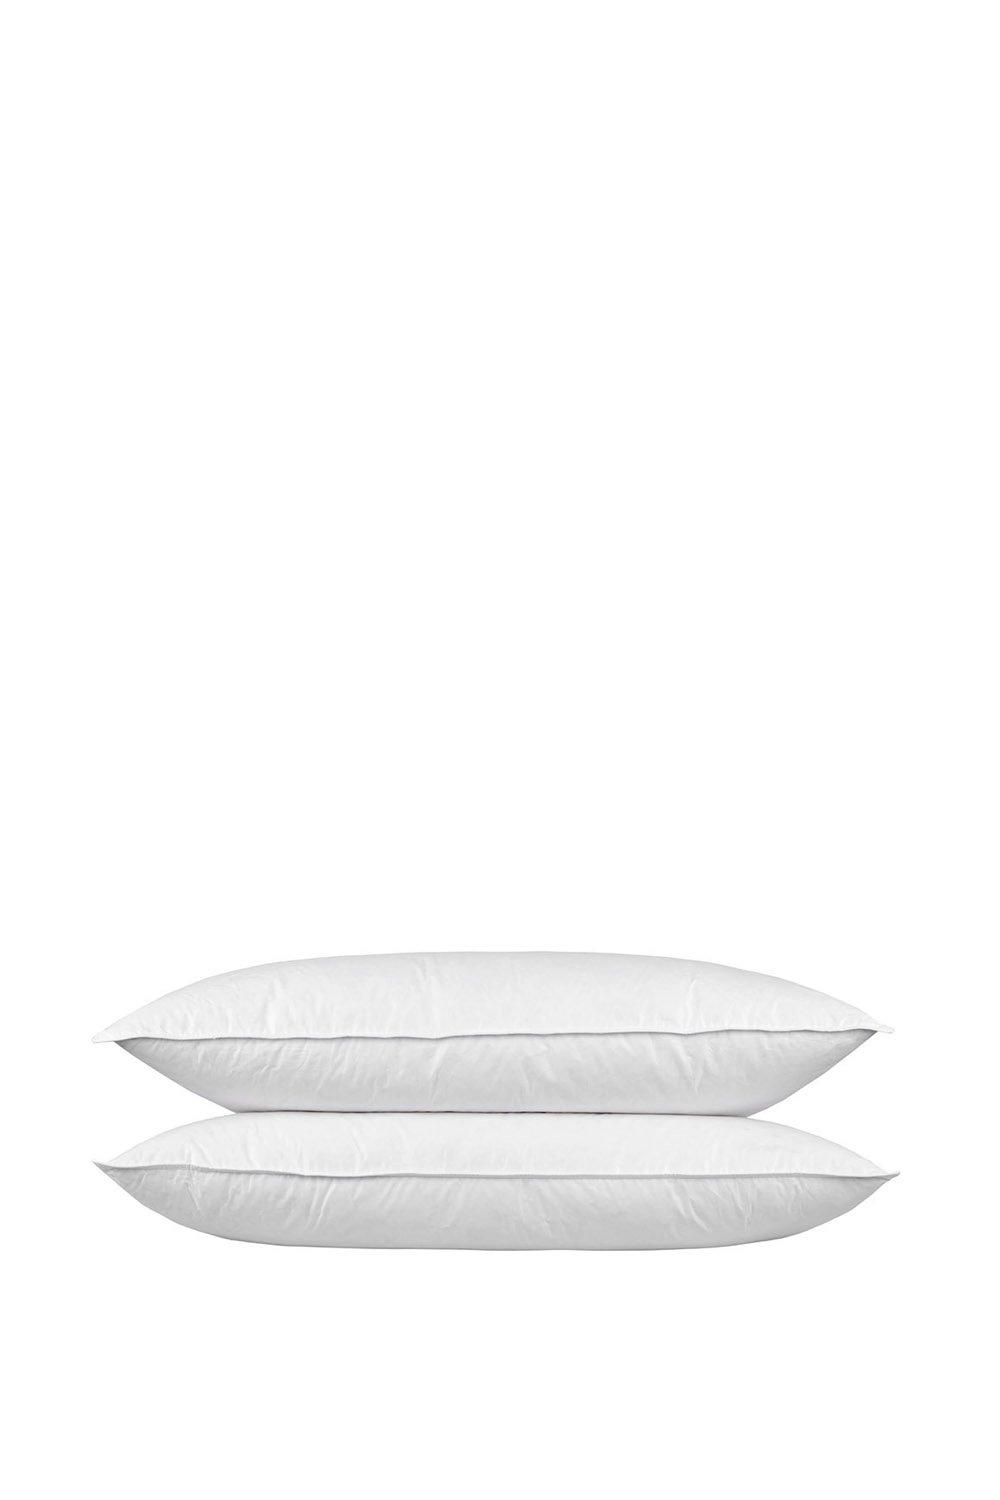 Goose Feather and Down King Size Pillow Pair